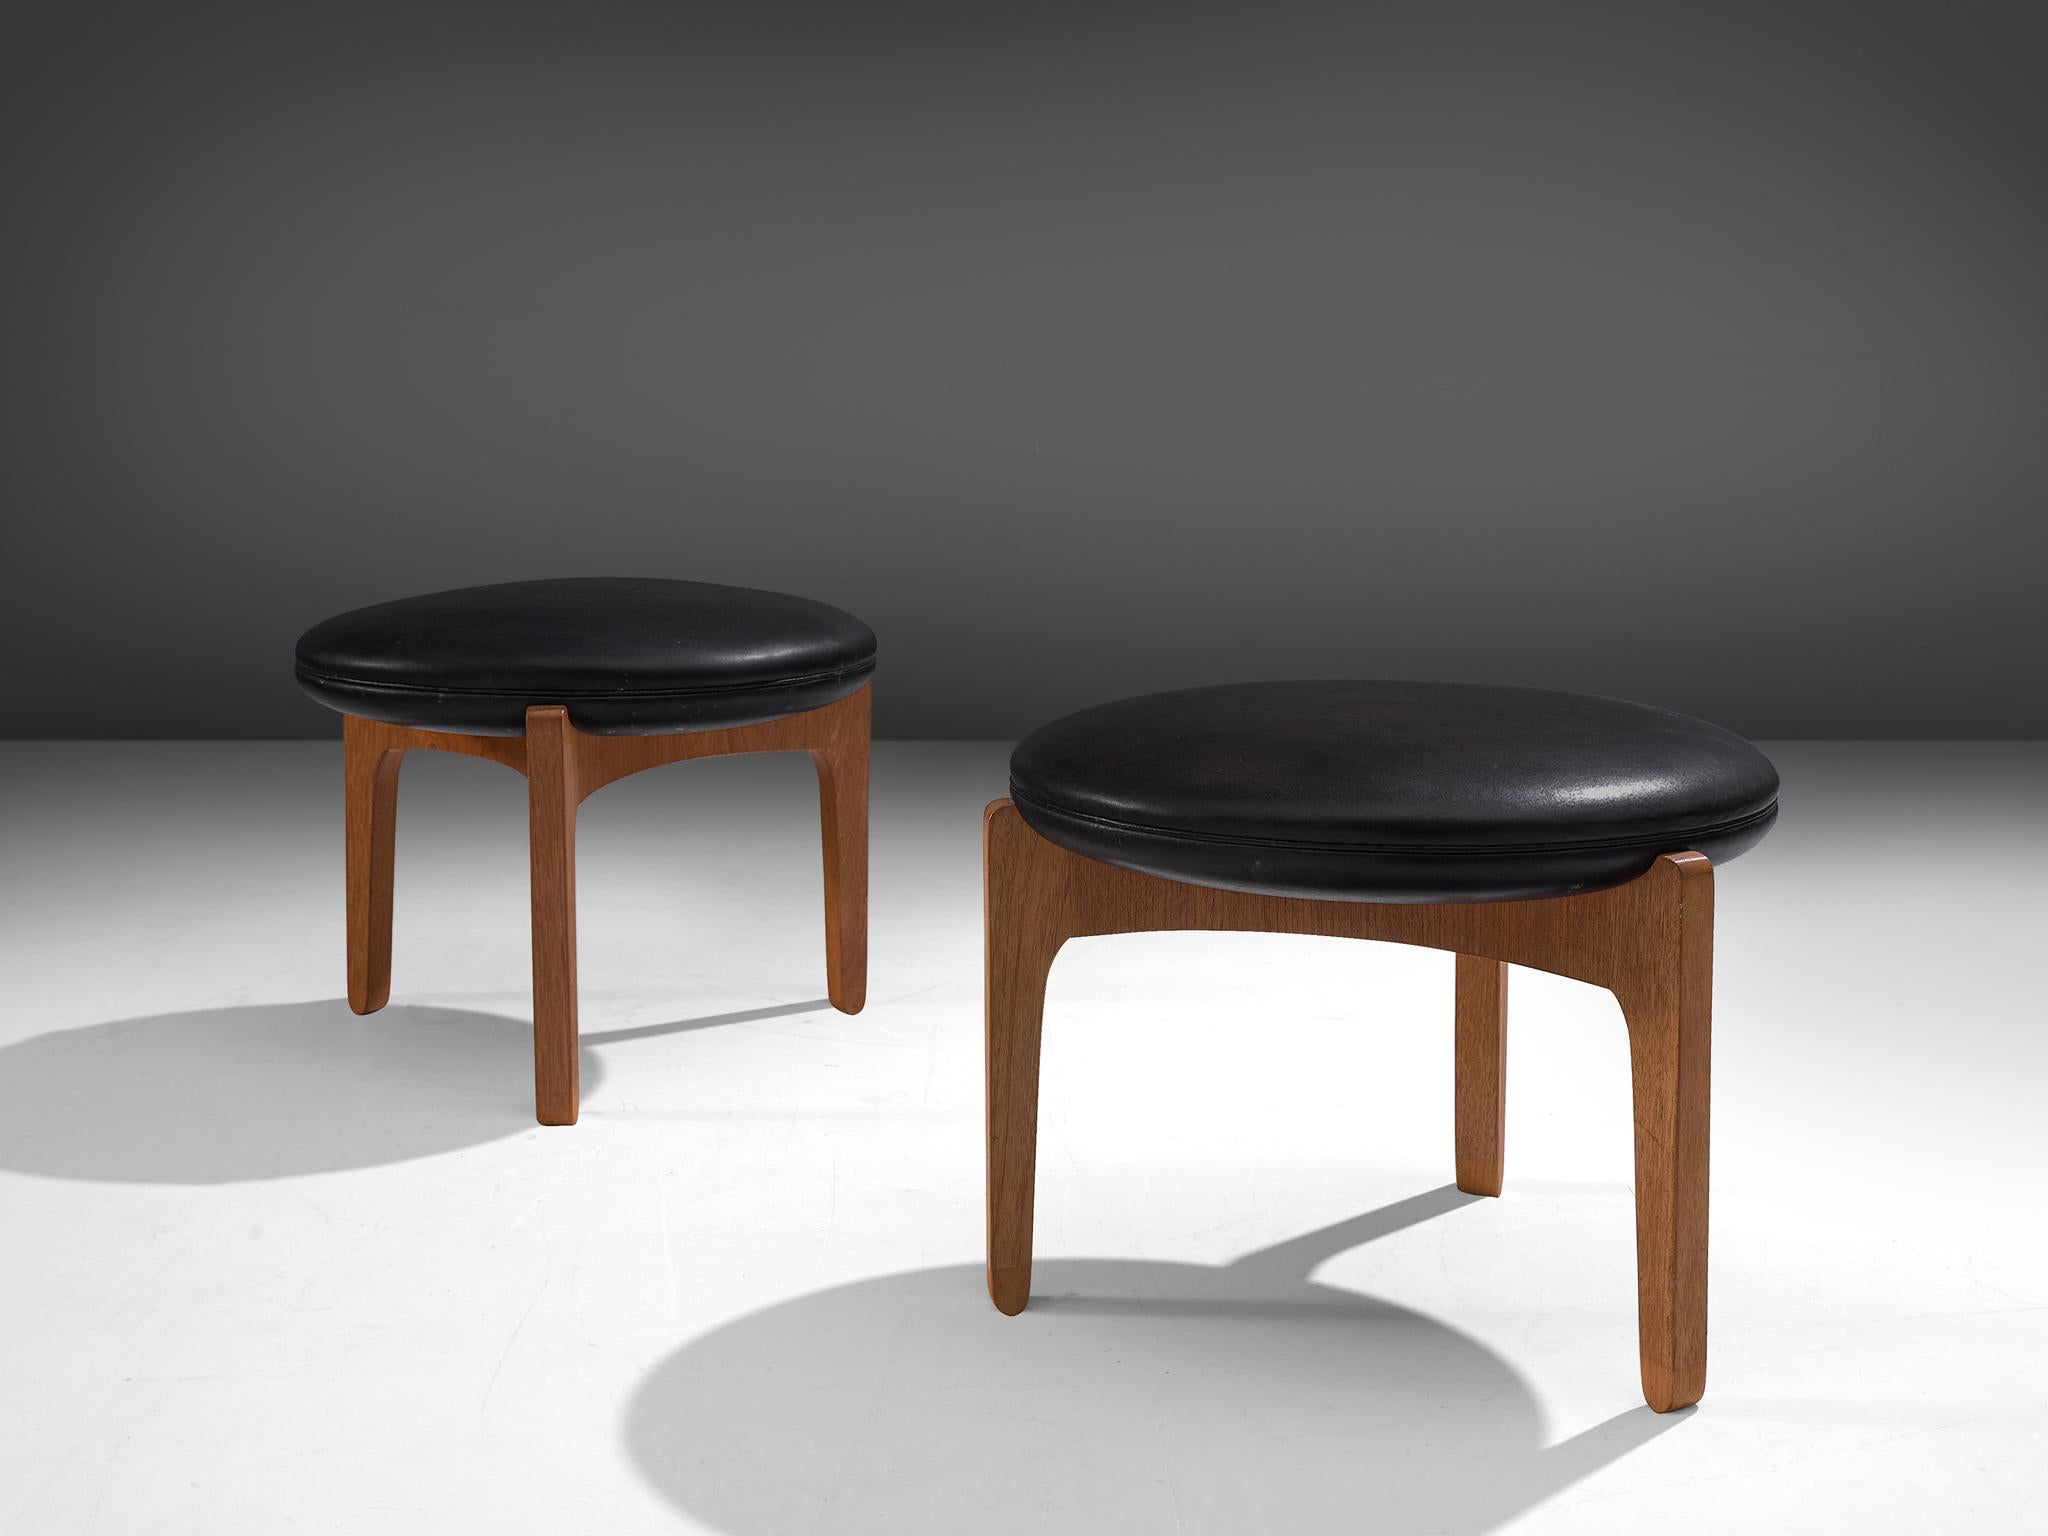 Sven Ellekaer for Christian Linneberg's Møbelfabrik, pair of stools, oak and leather, Denmark, 1960s

Pair of stools designed by the Danish Sven Ellekaer. The stools feature a perfect round circle as seats, which are upholstered in black leather.